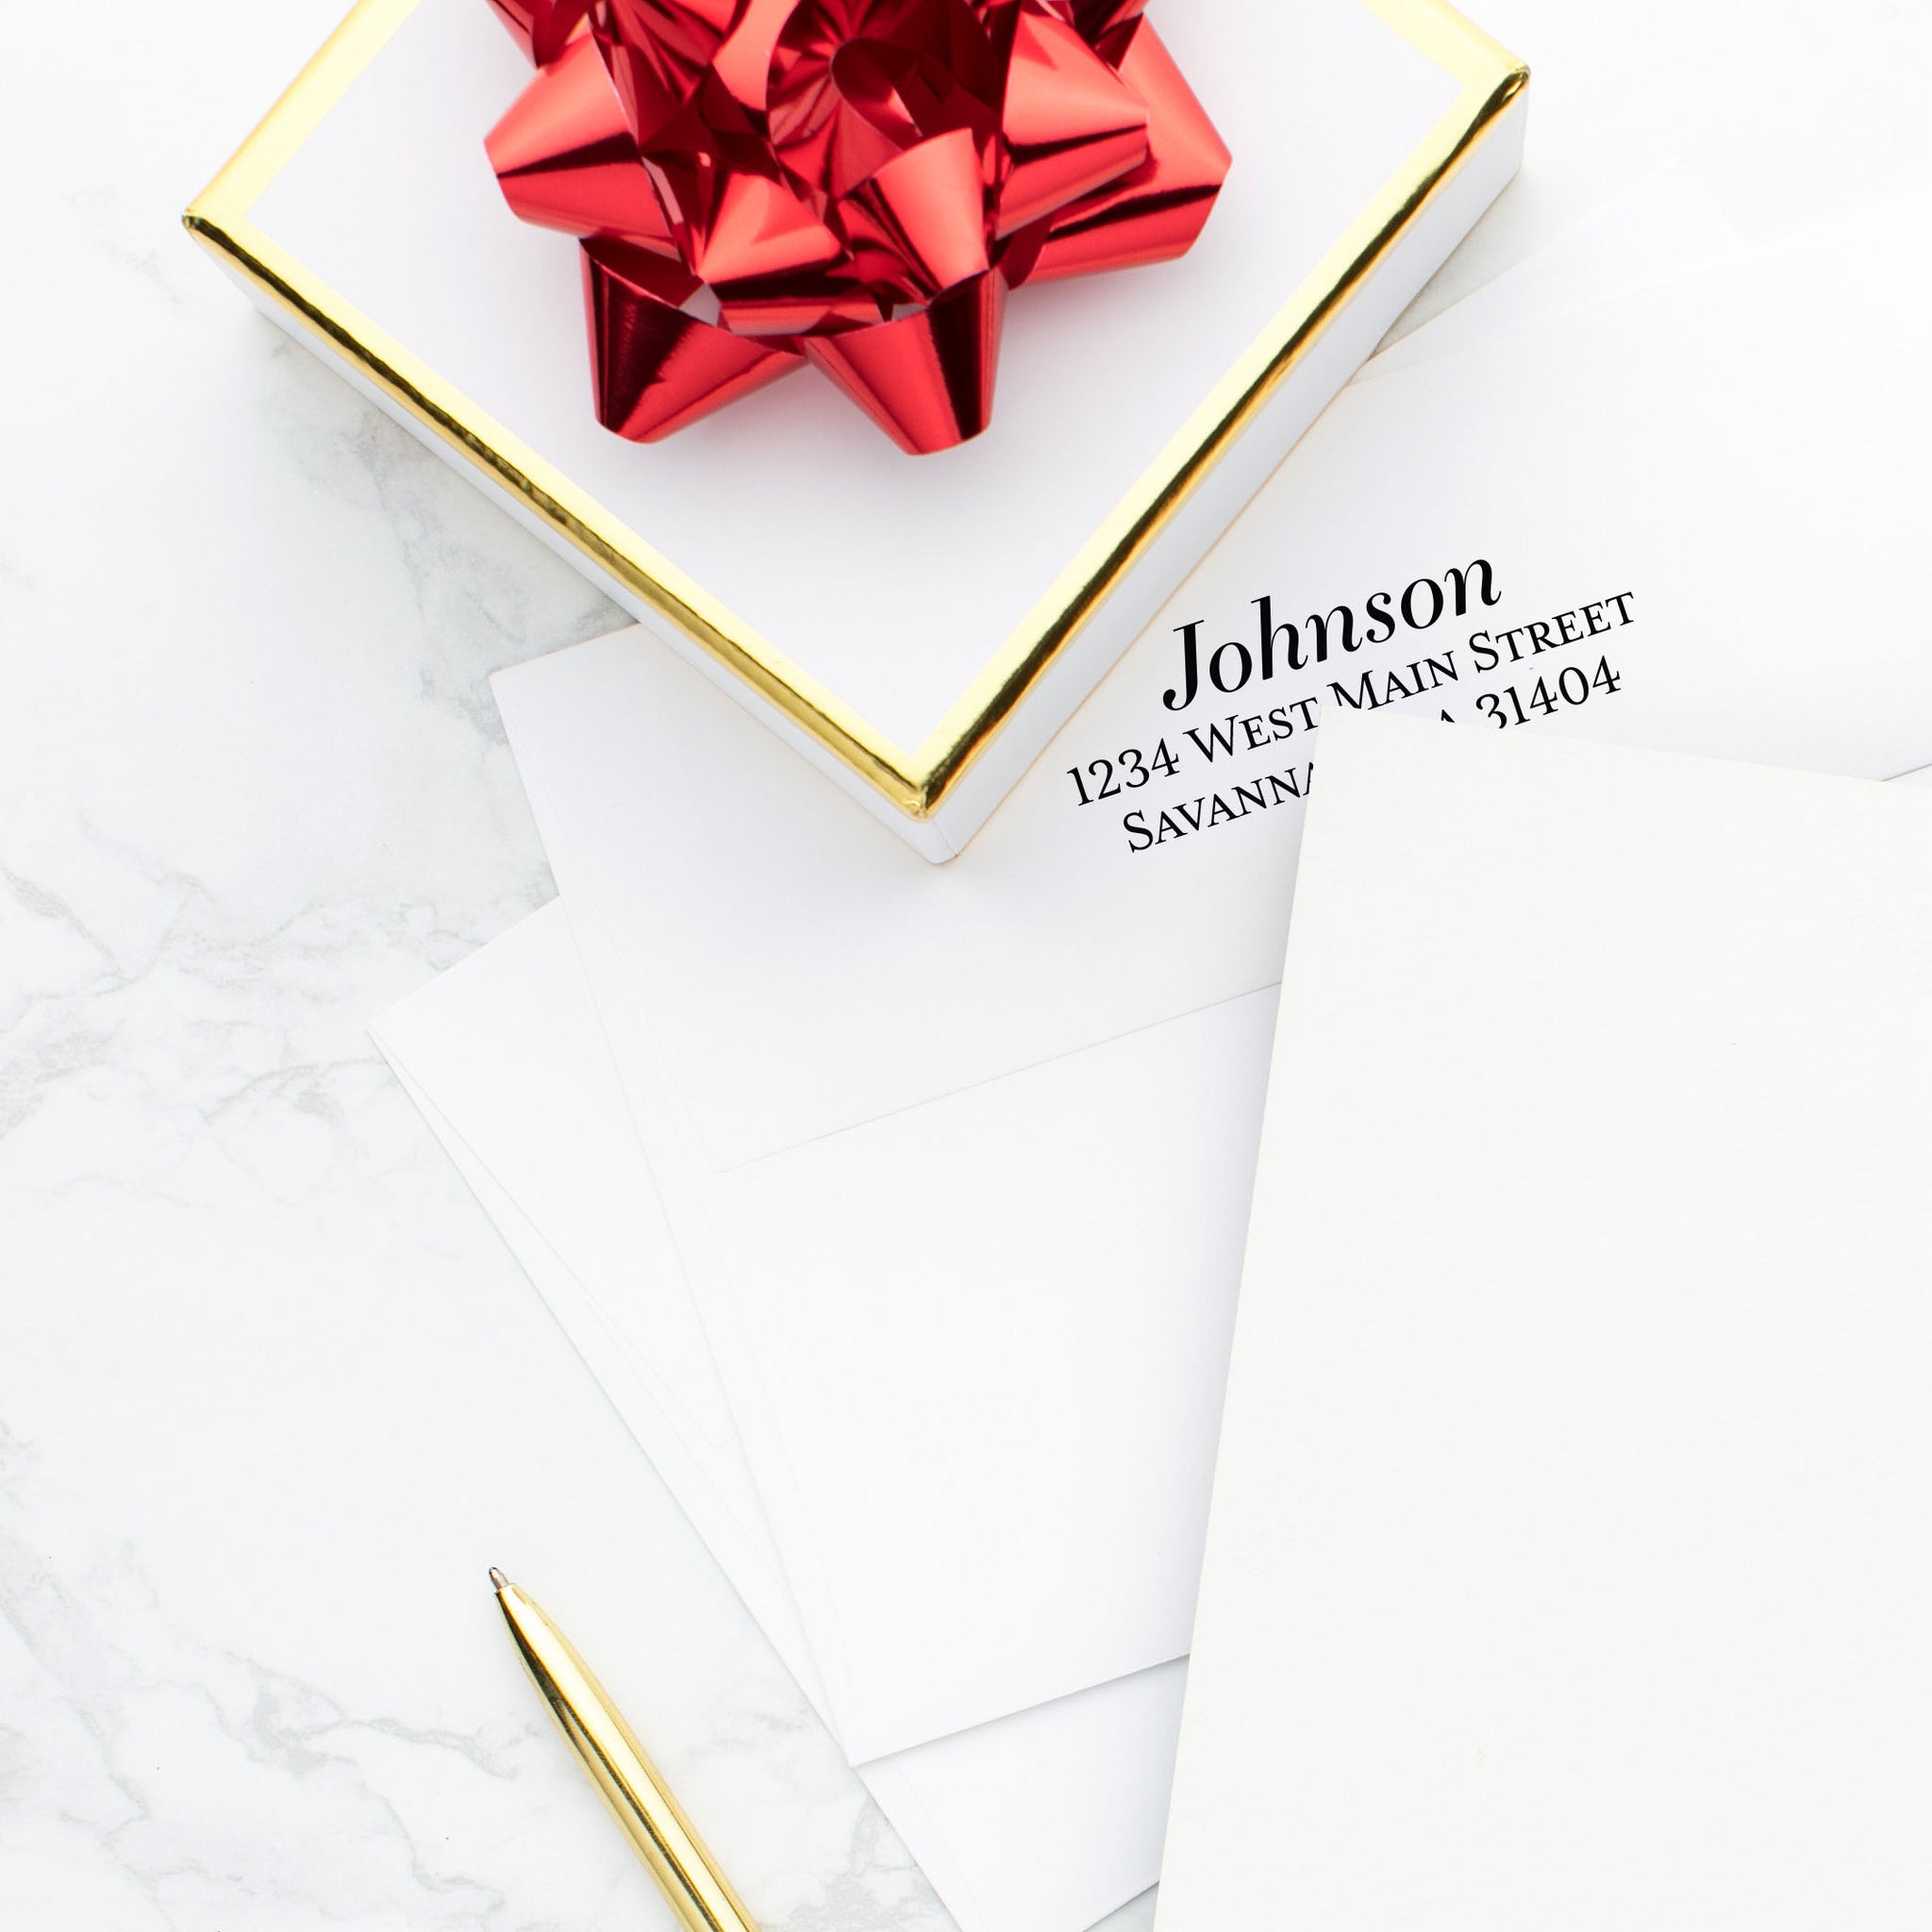 Classic serif font for envelope imprinting on white envelope with gold box and red holiday bow on desk.